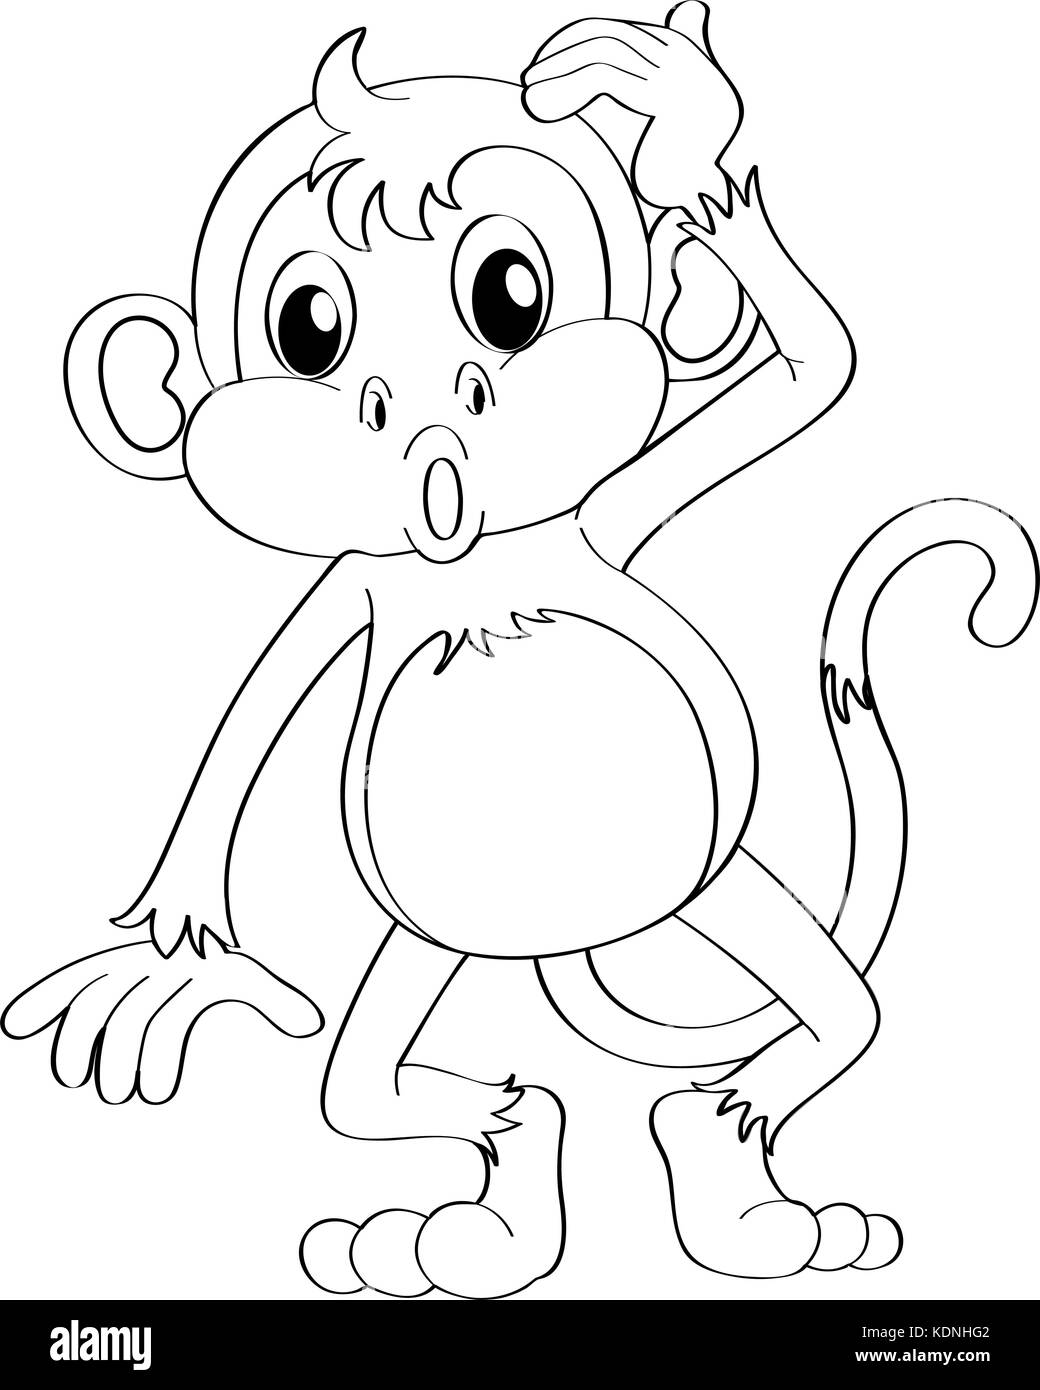 Monkey Outline High Resolution Stock Photography And Images Alamy Search for hand drawn monkey pictures, lovepik.com offers 392358 all free stock images, which updates 100 free pictures daily to make your work professional and easy. https www alamy com stock image animal outline for funny monkey illustration 163358610 html